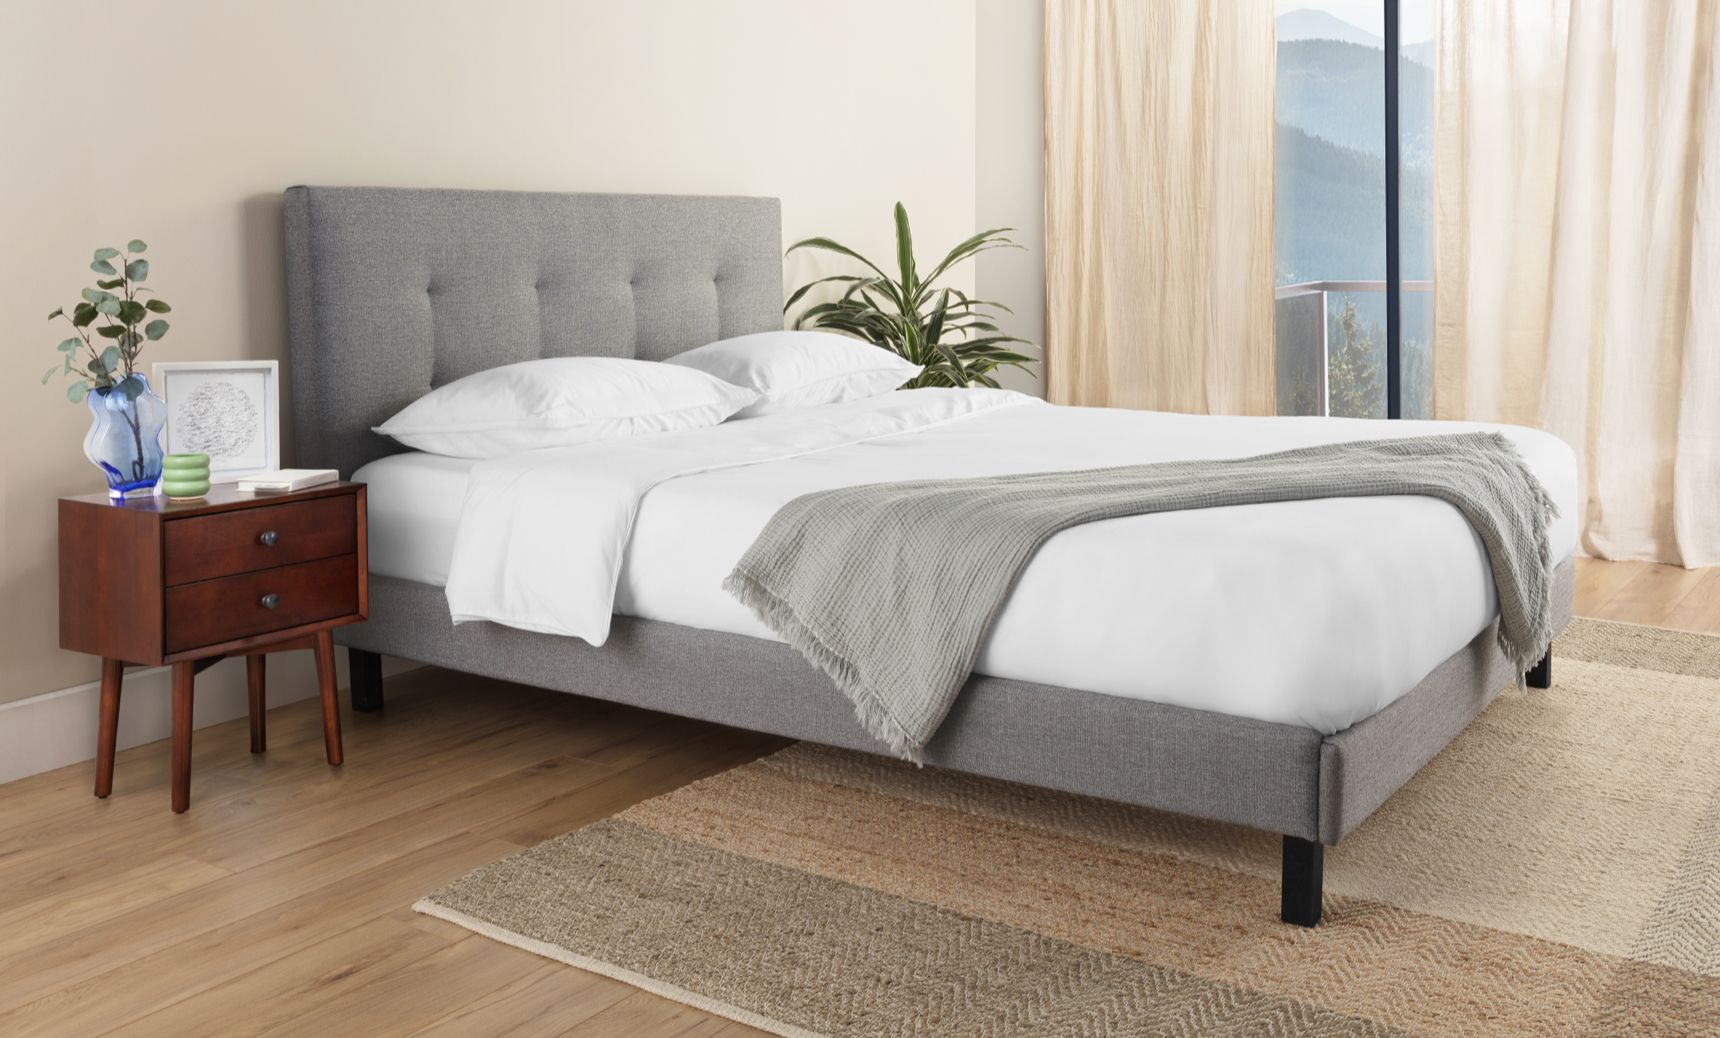 The Endy Upholstered Bed in Heather Grey colourway